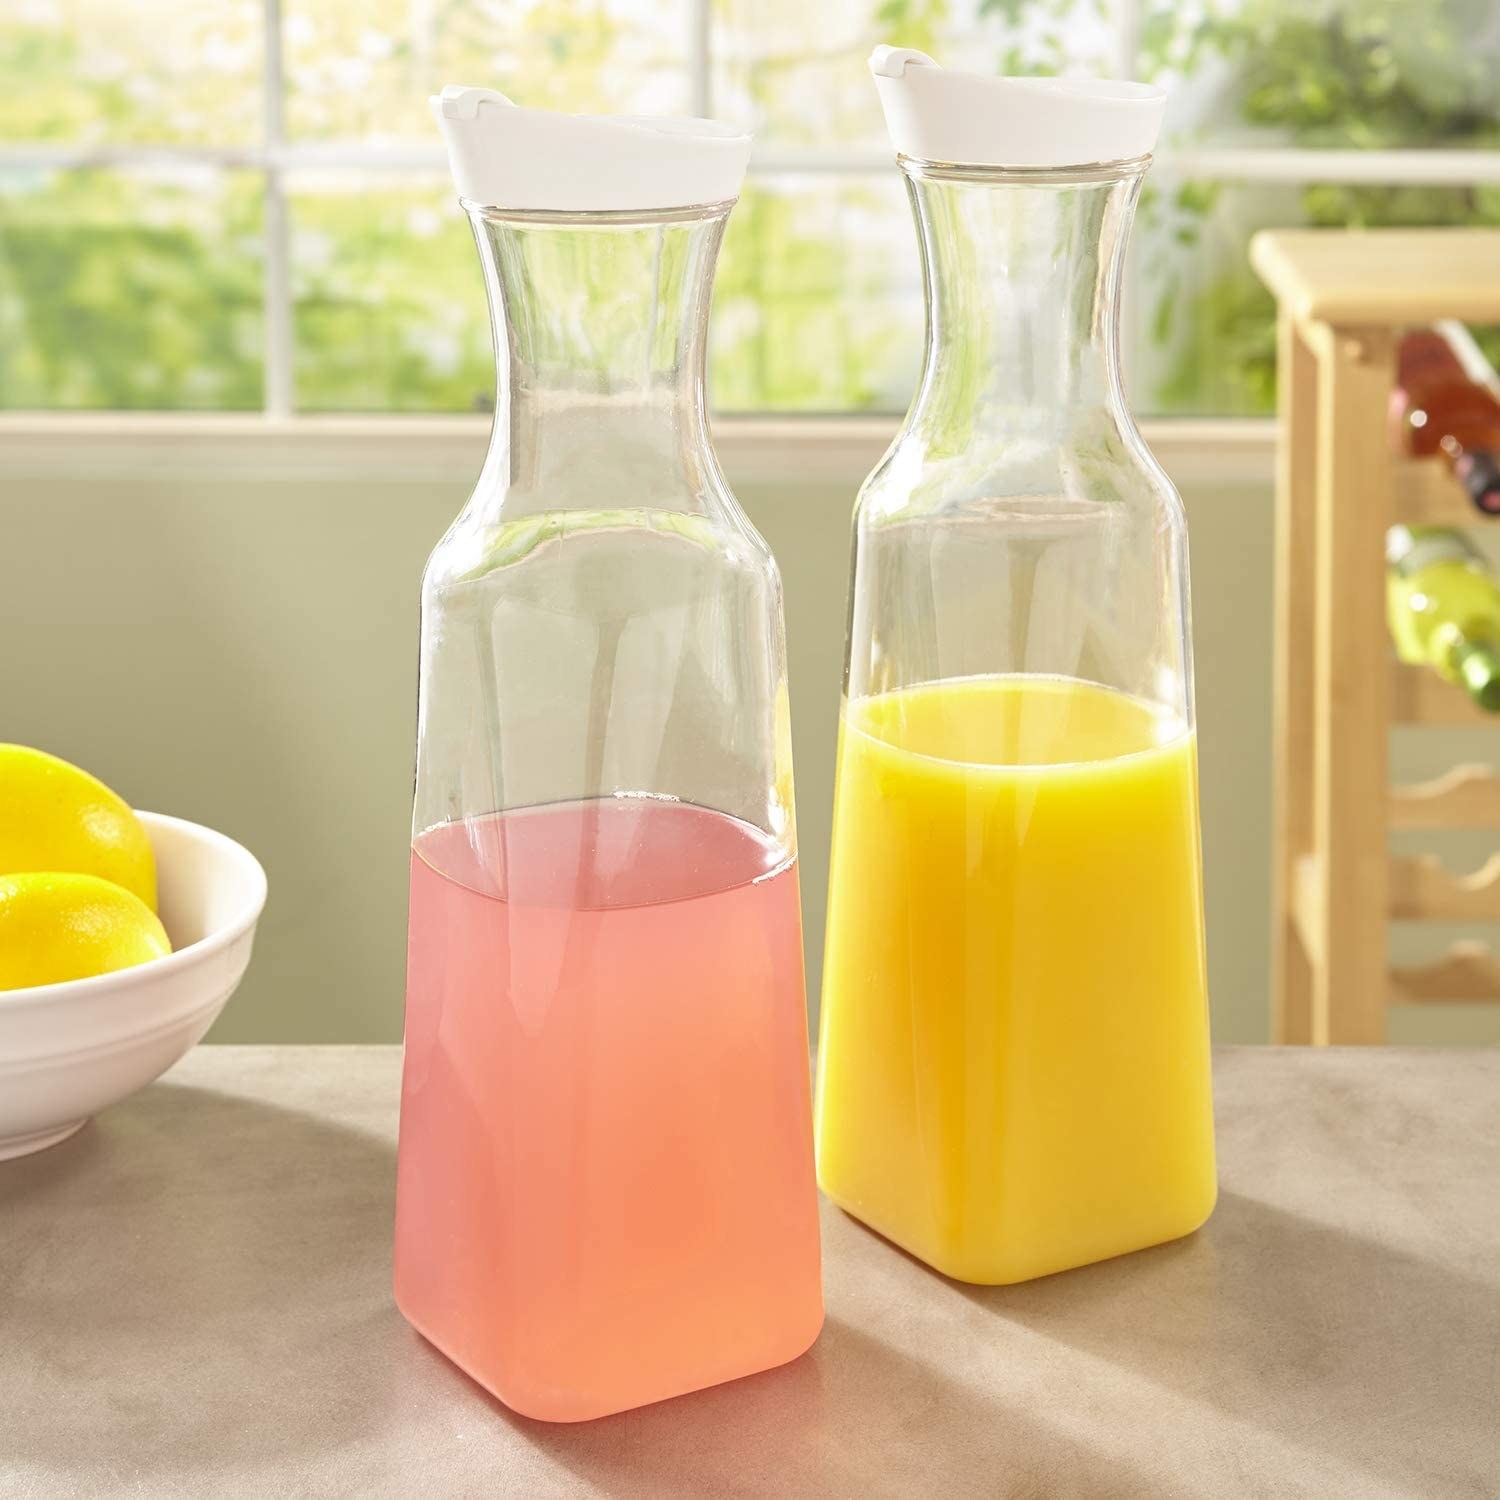 two plastic carafes filled with juice on a kitchen countertop